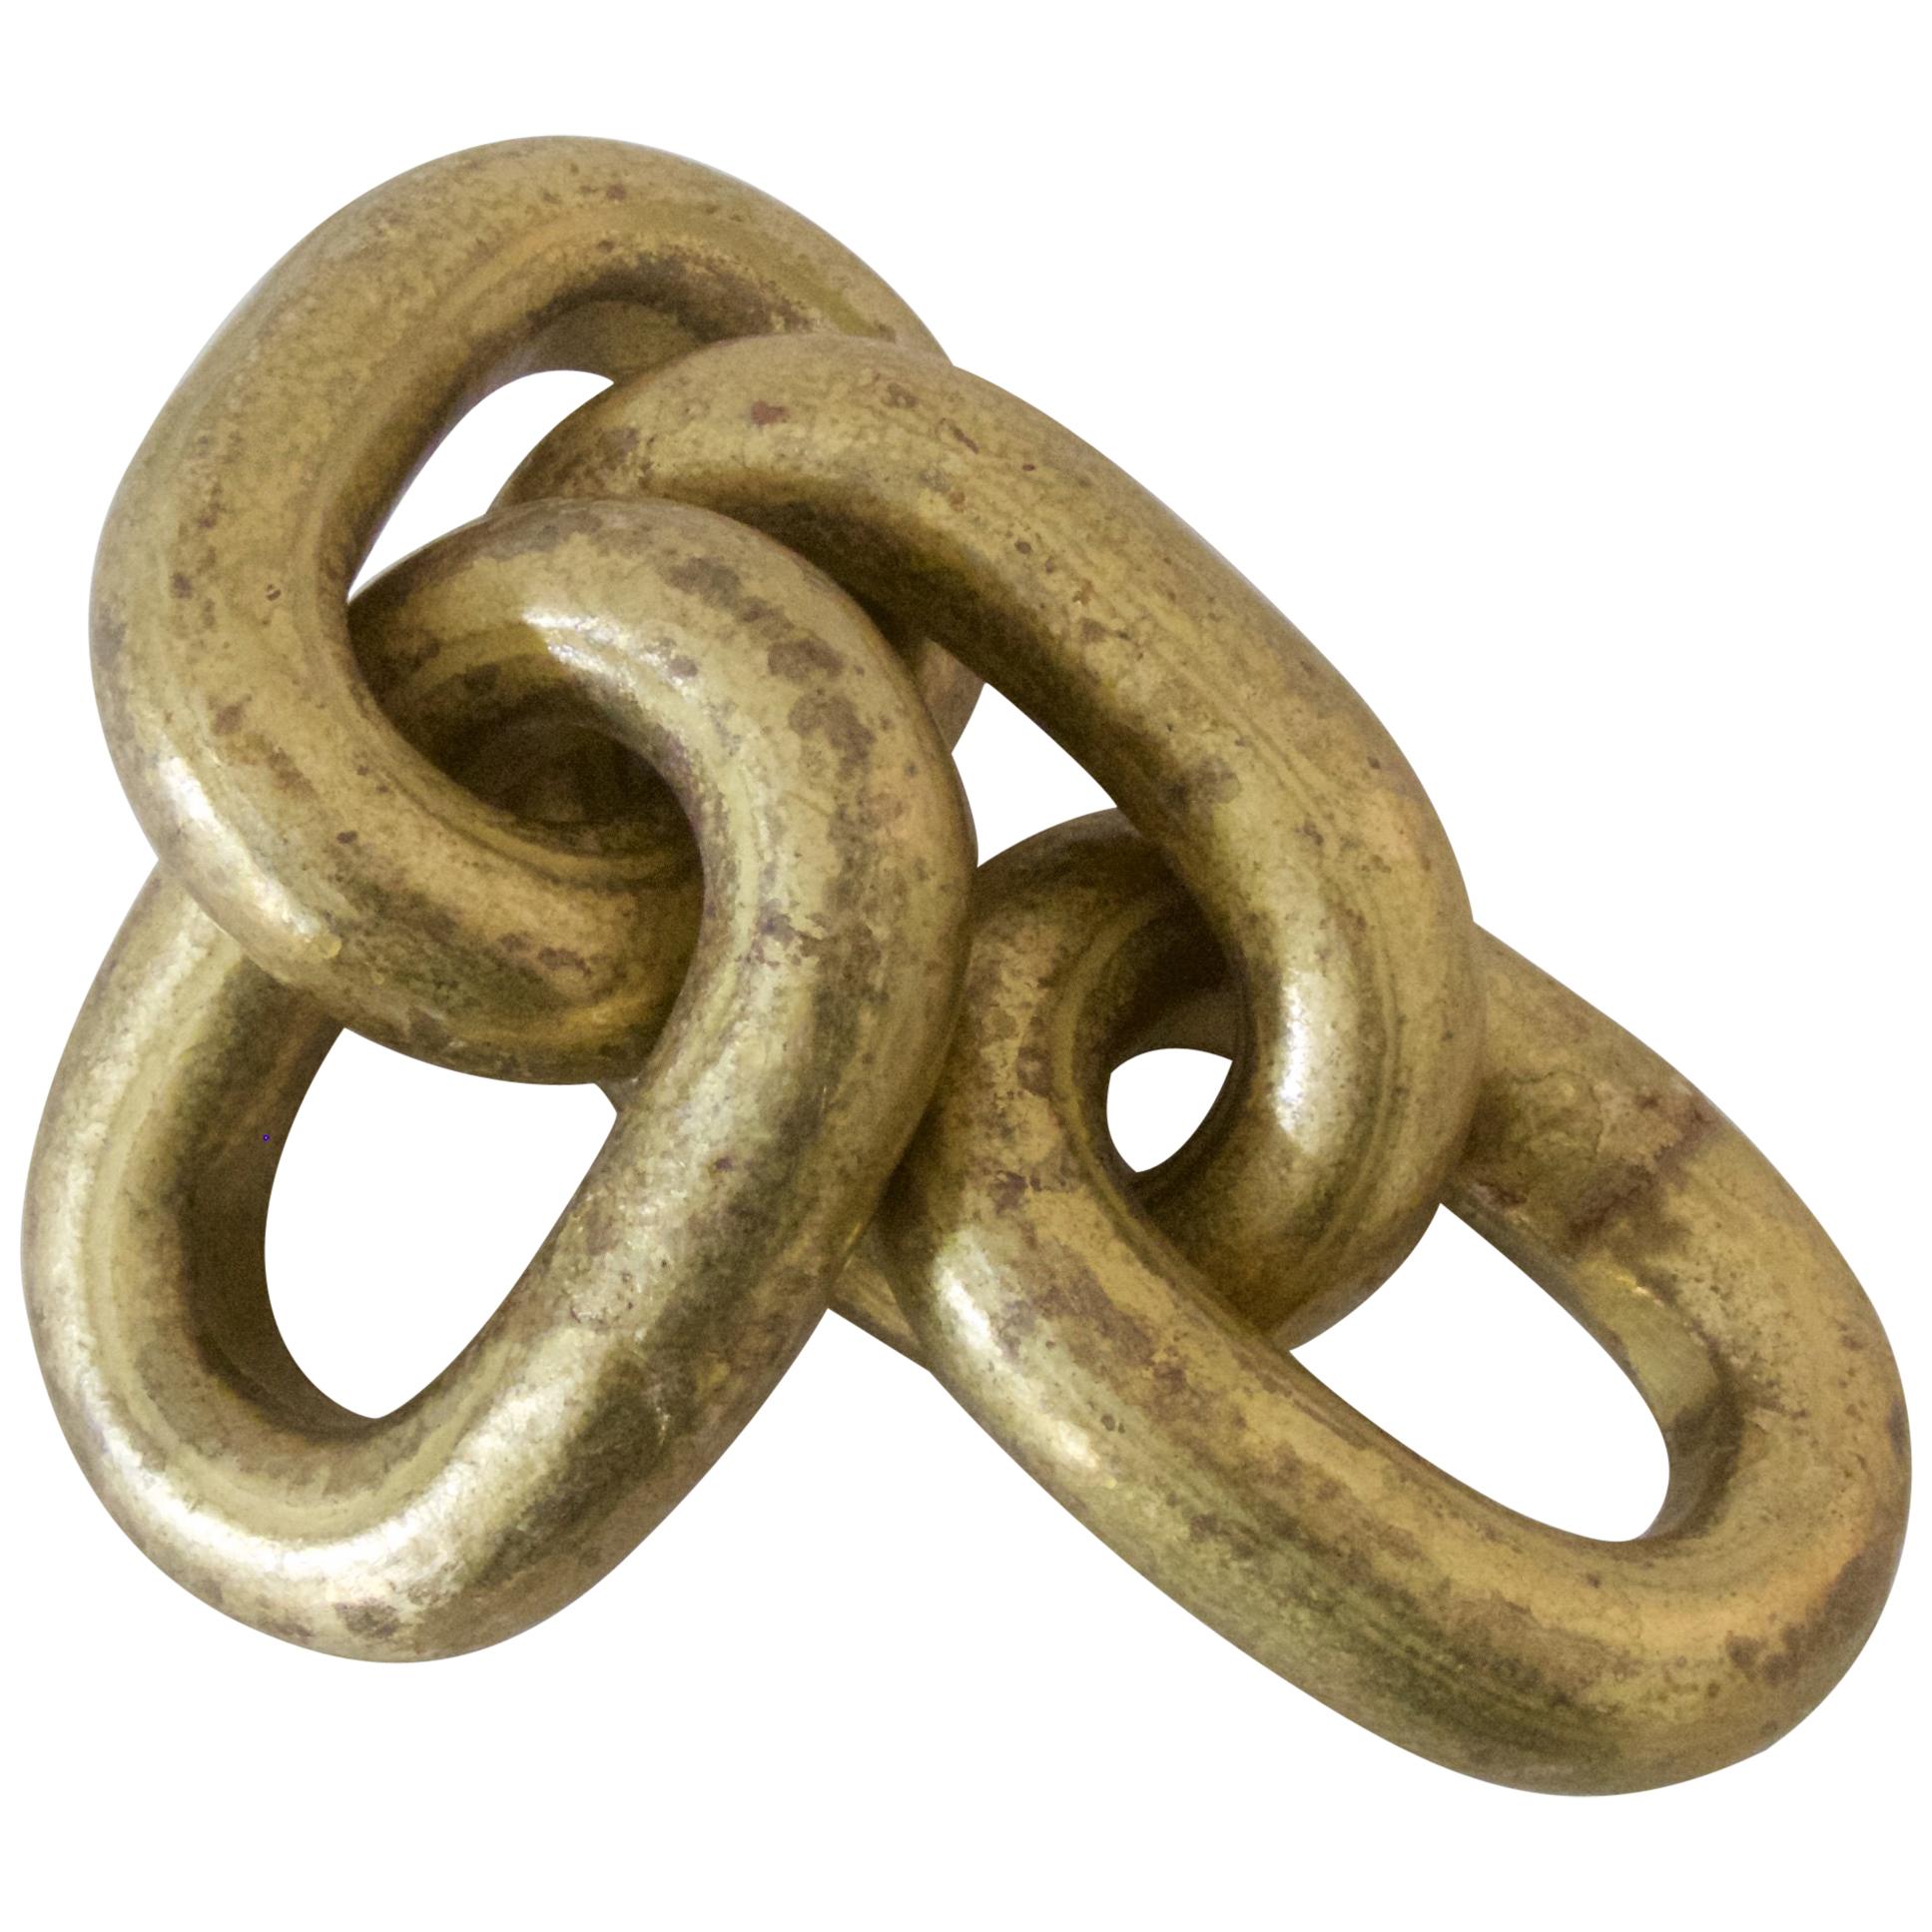 Paperweight "Chain" by Carl Auböck